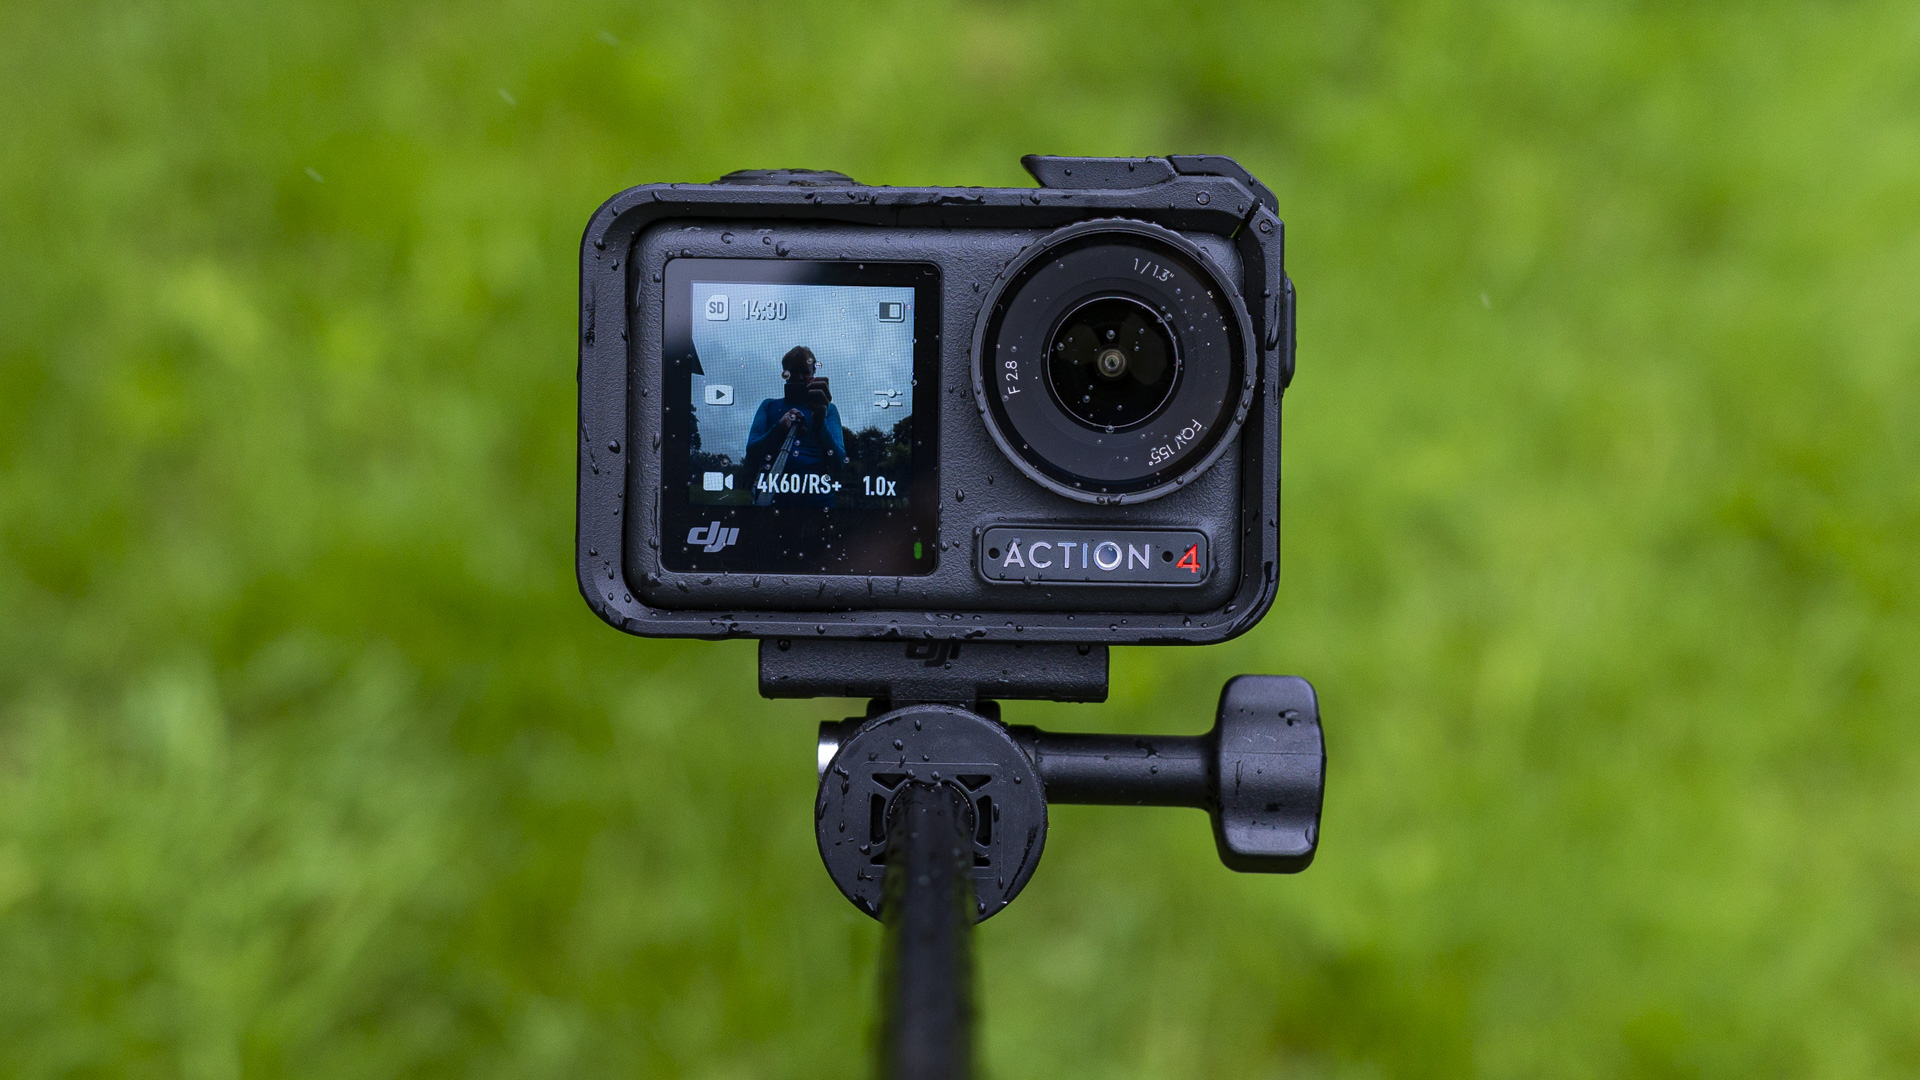 DJI Osmo Action 4 camera on the selfie stick accessory